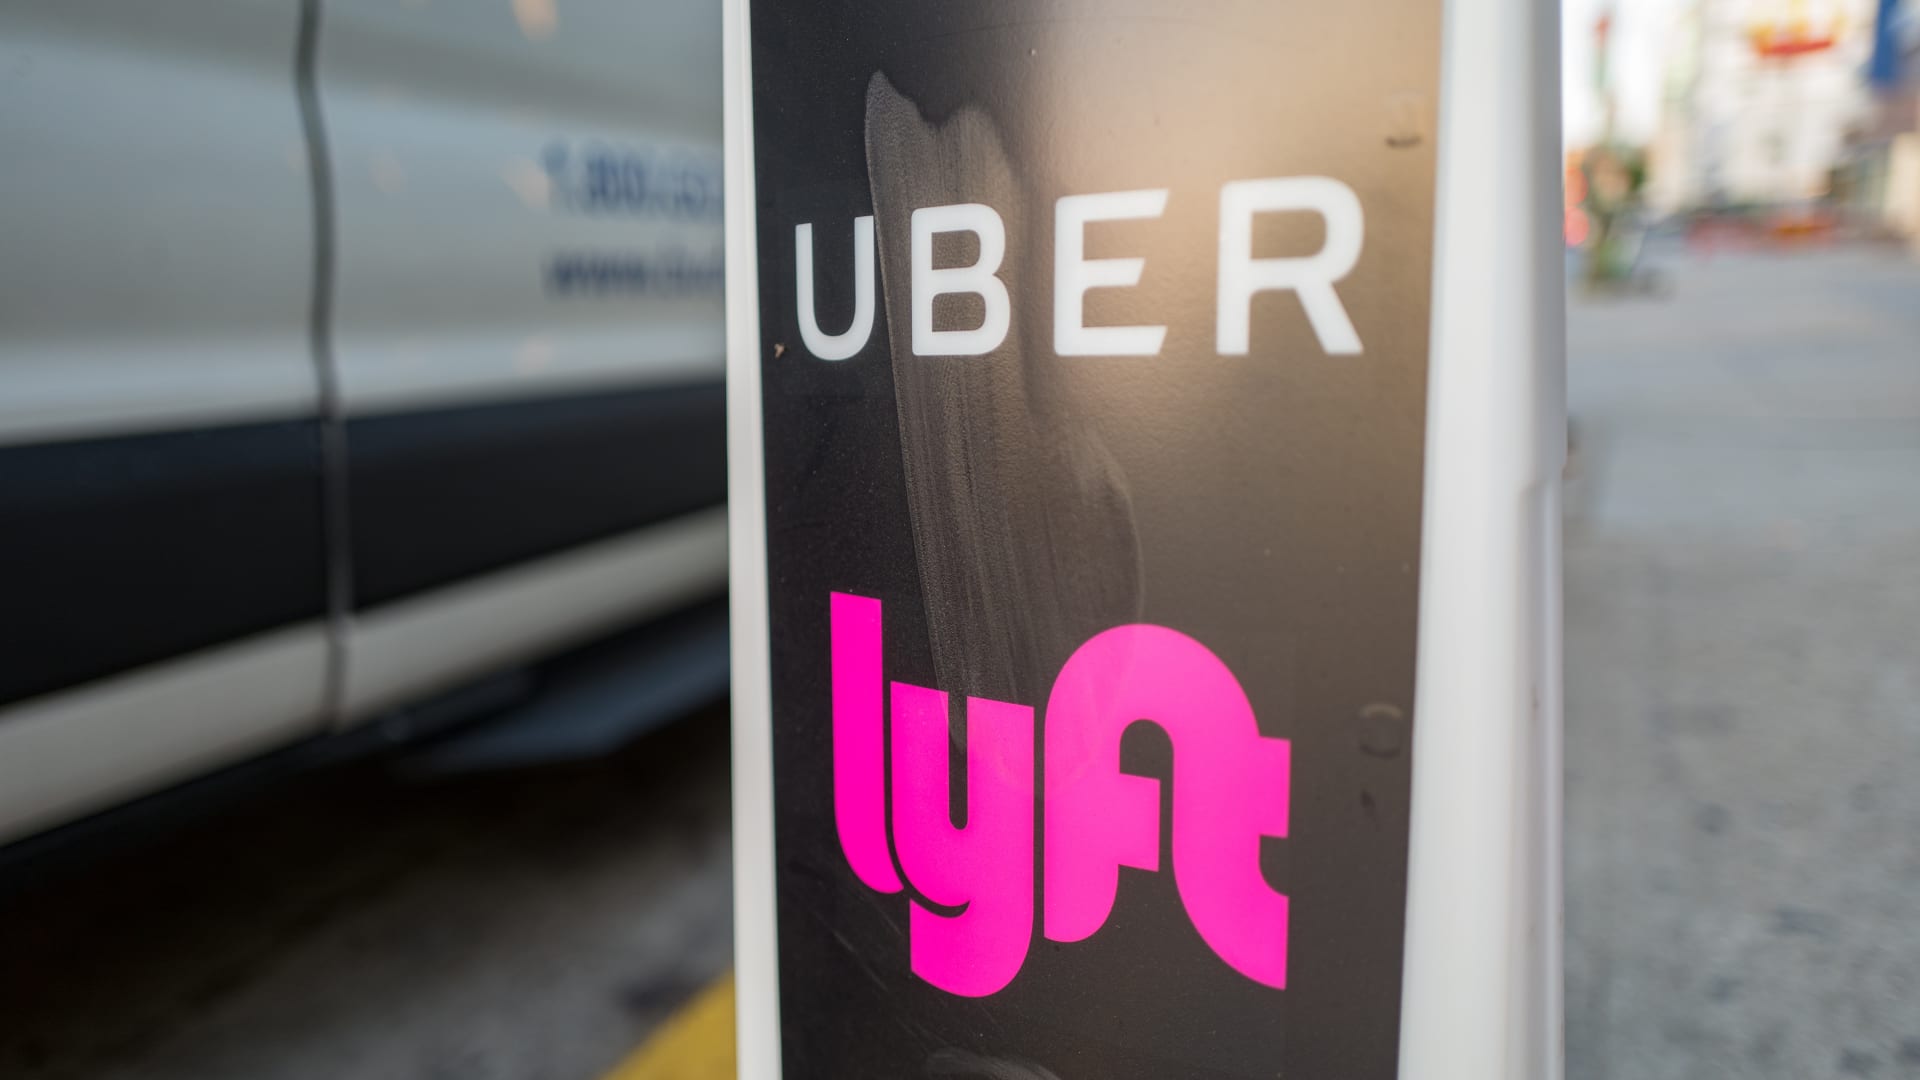 Stocks making the biggest moves midday: Uber, Lyft, Airbnb, Starbucks and more